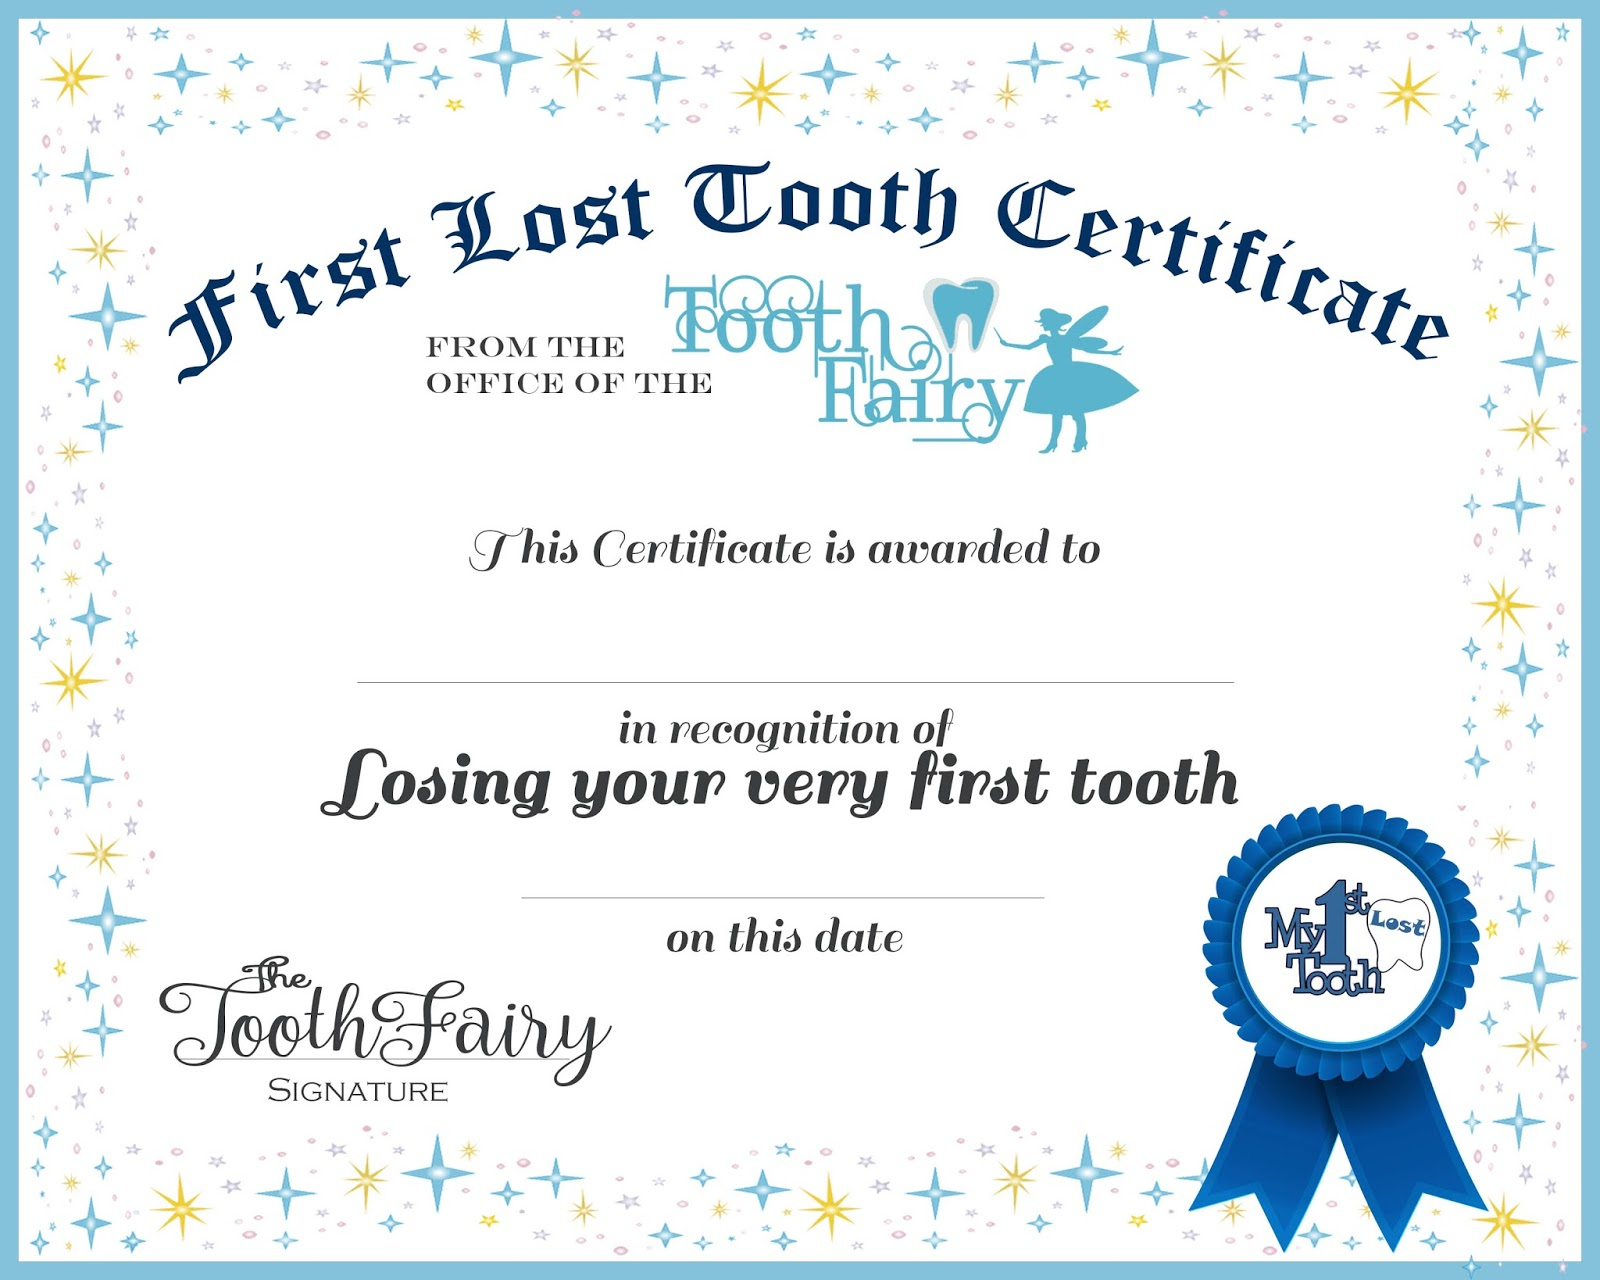 Easy Tooth Fairy Ideas Tips For Parents Free Printables For Tooth - Free Printable Tooth Fairy Certificate